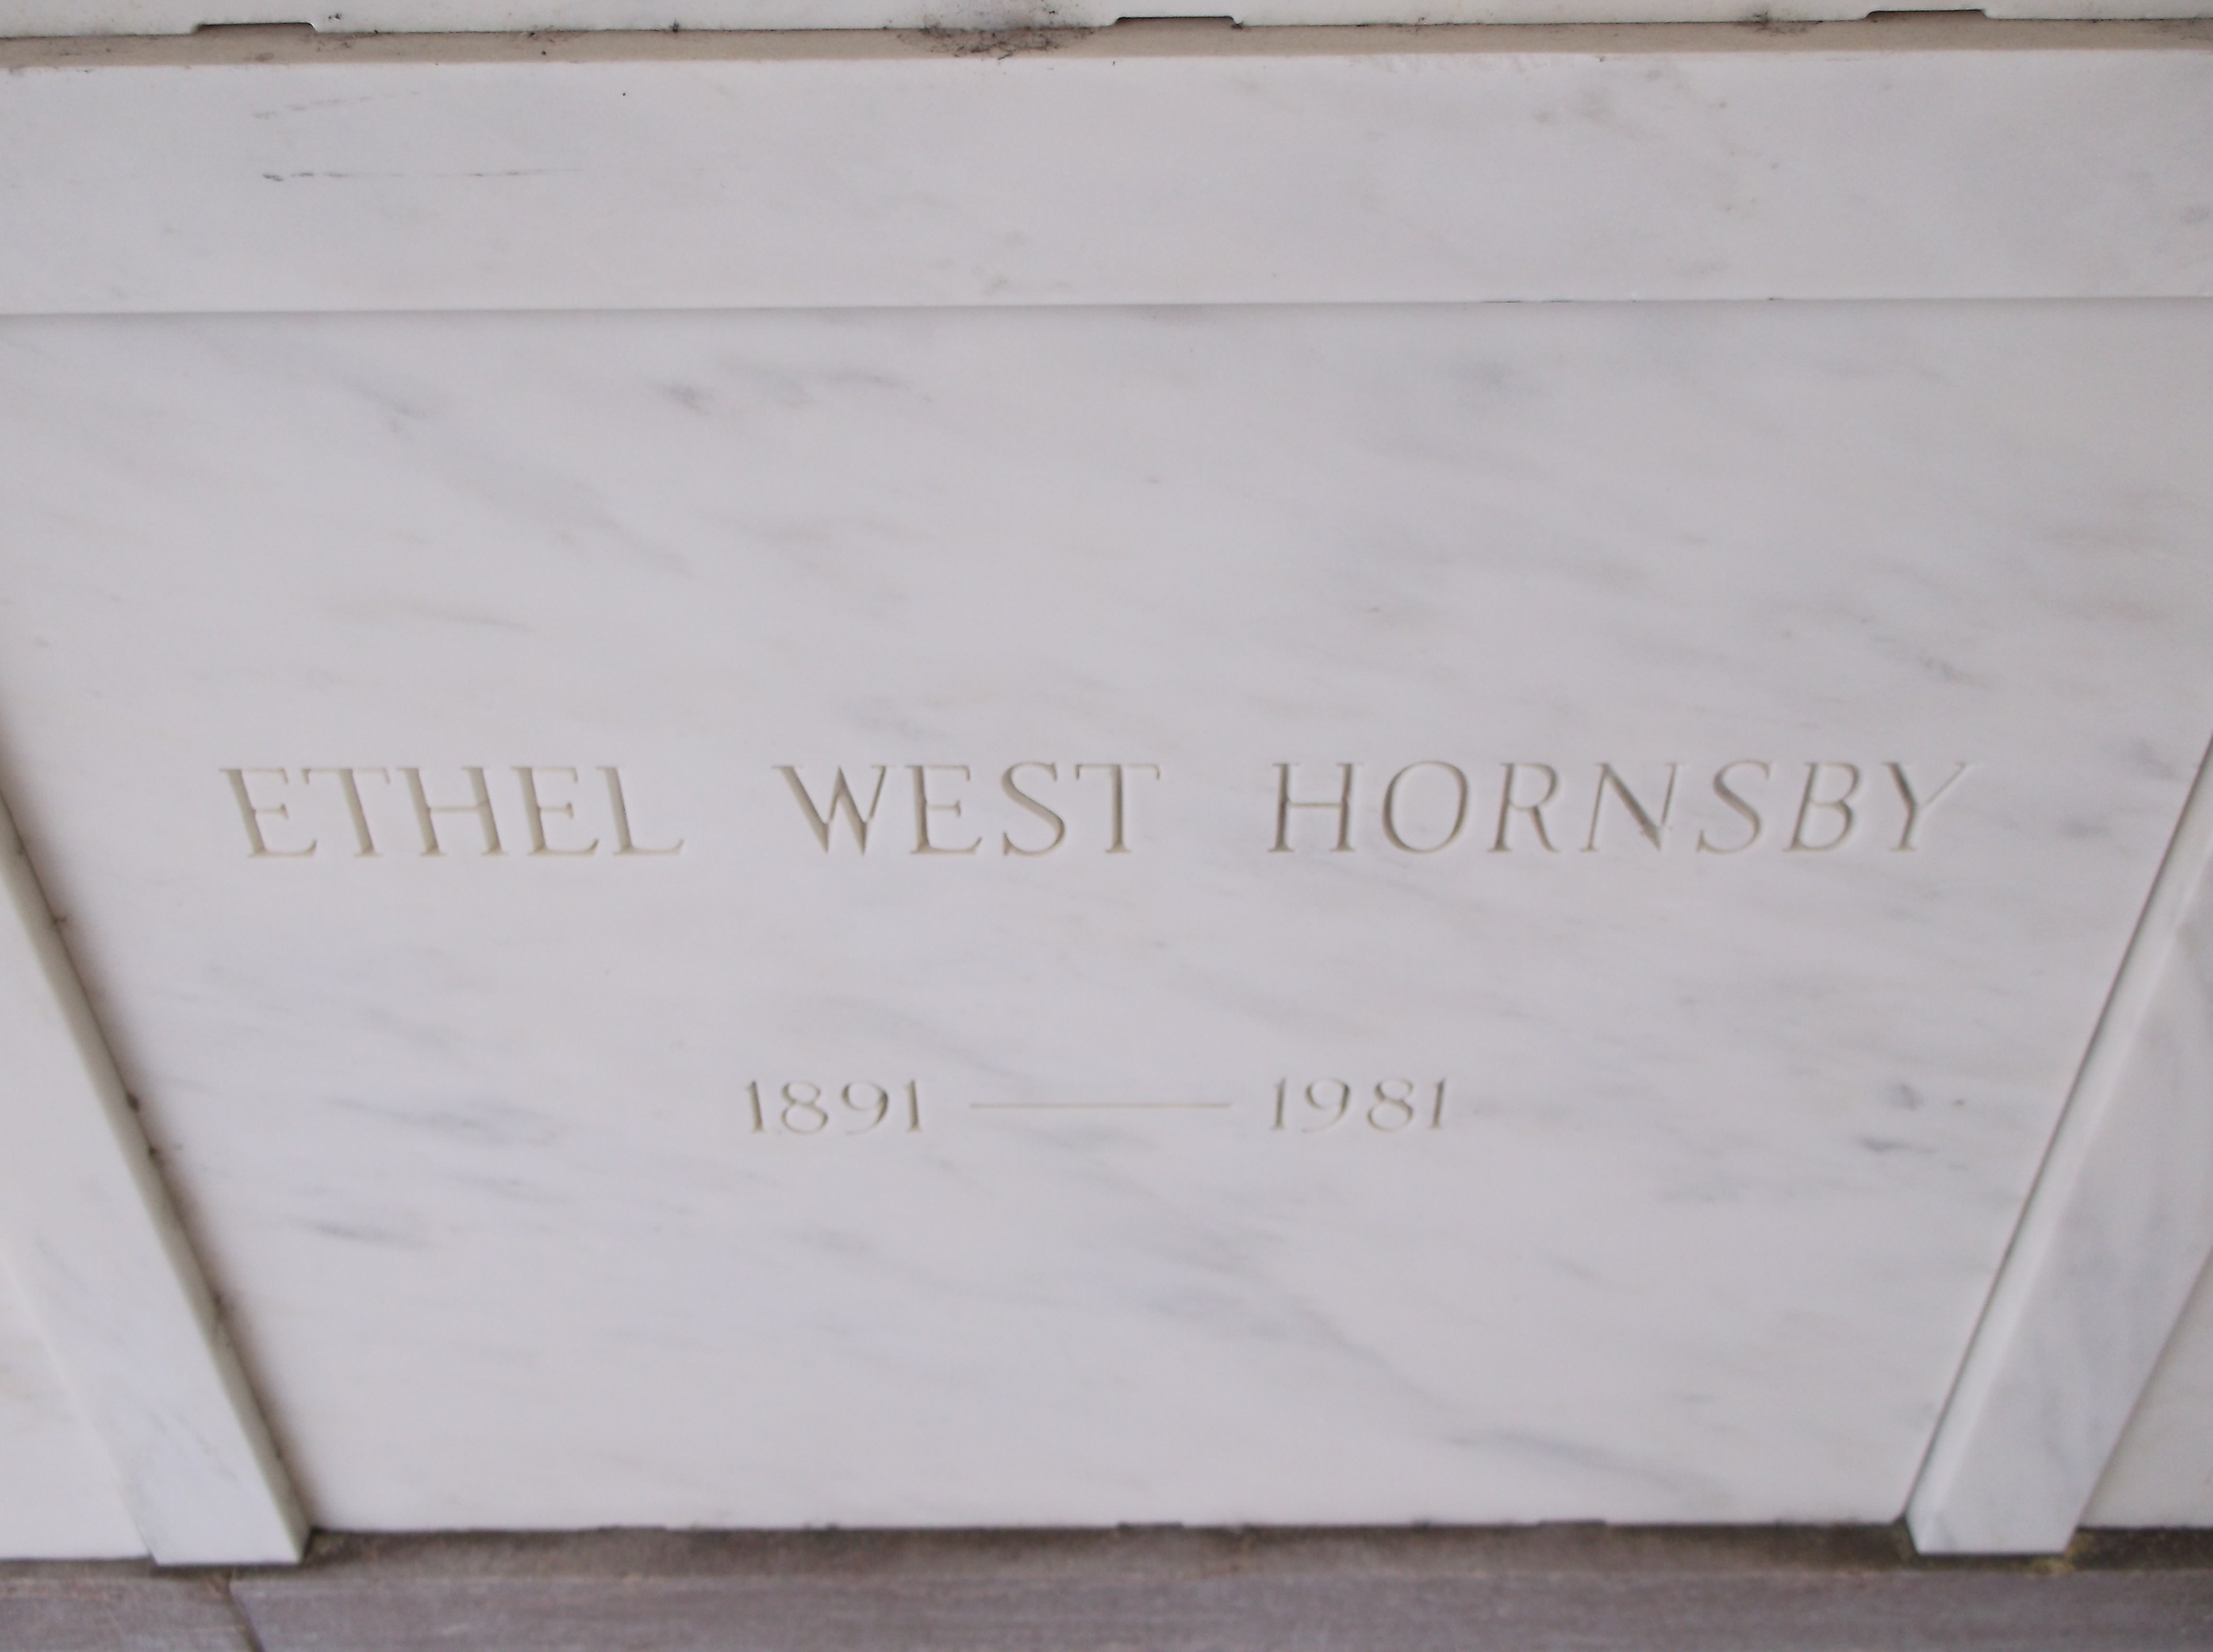 Ethel West Hornsby